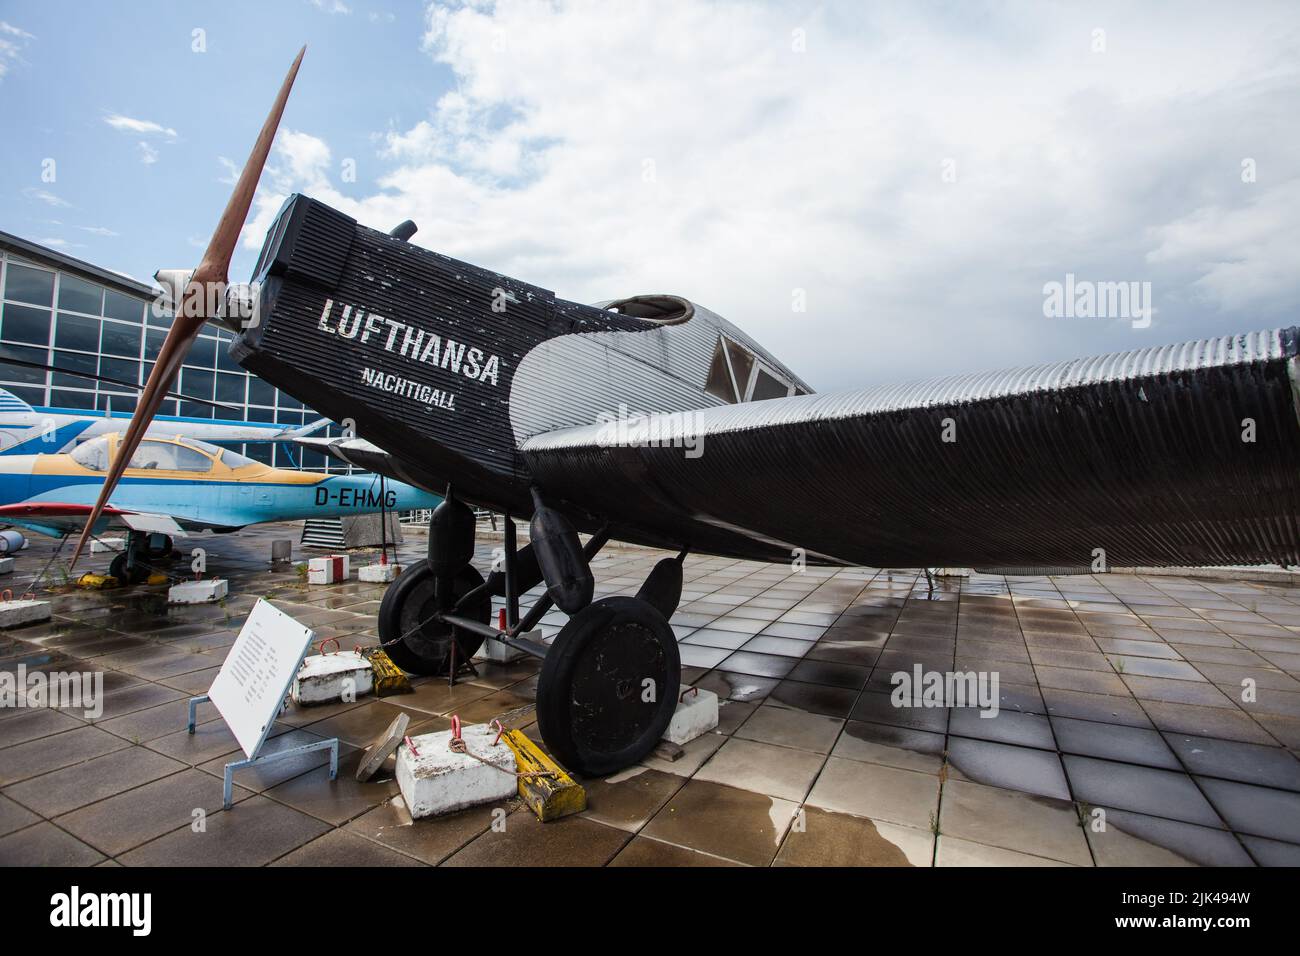 Stuttgart airport, Germany, open space airplane museum,historic Lufthanza airplane on display Stock Photo